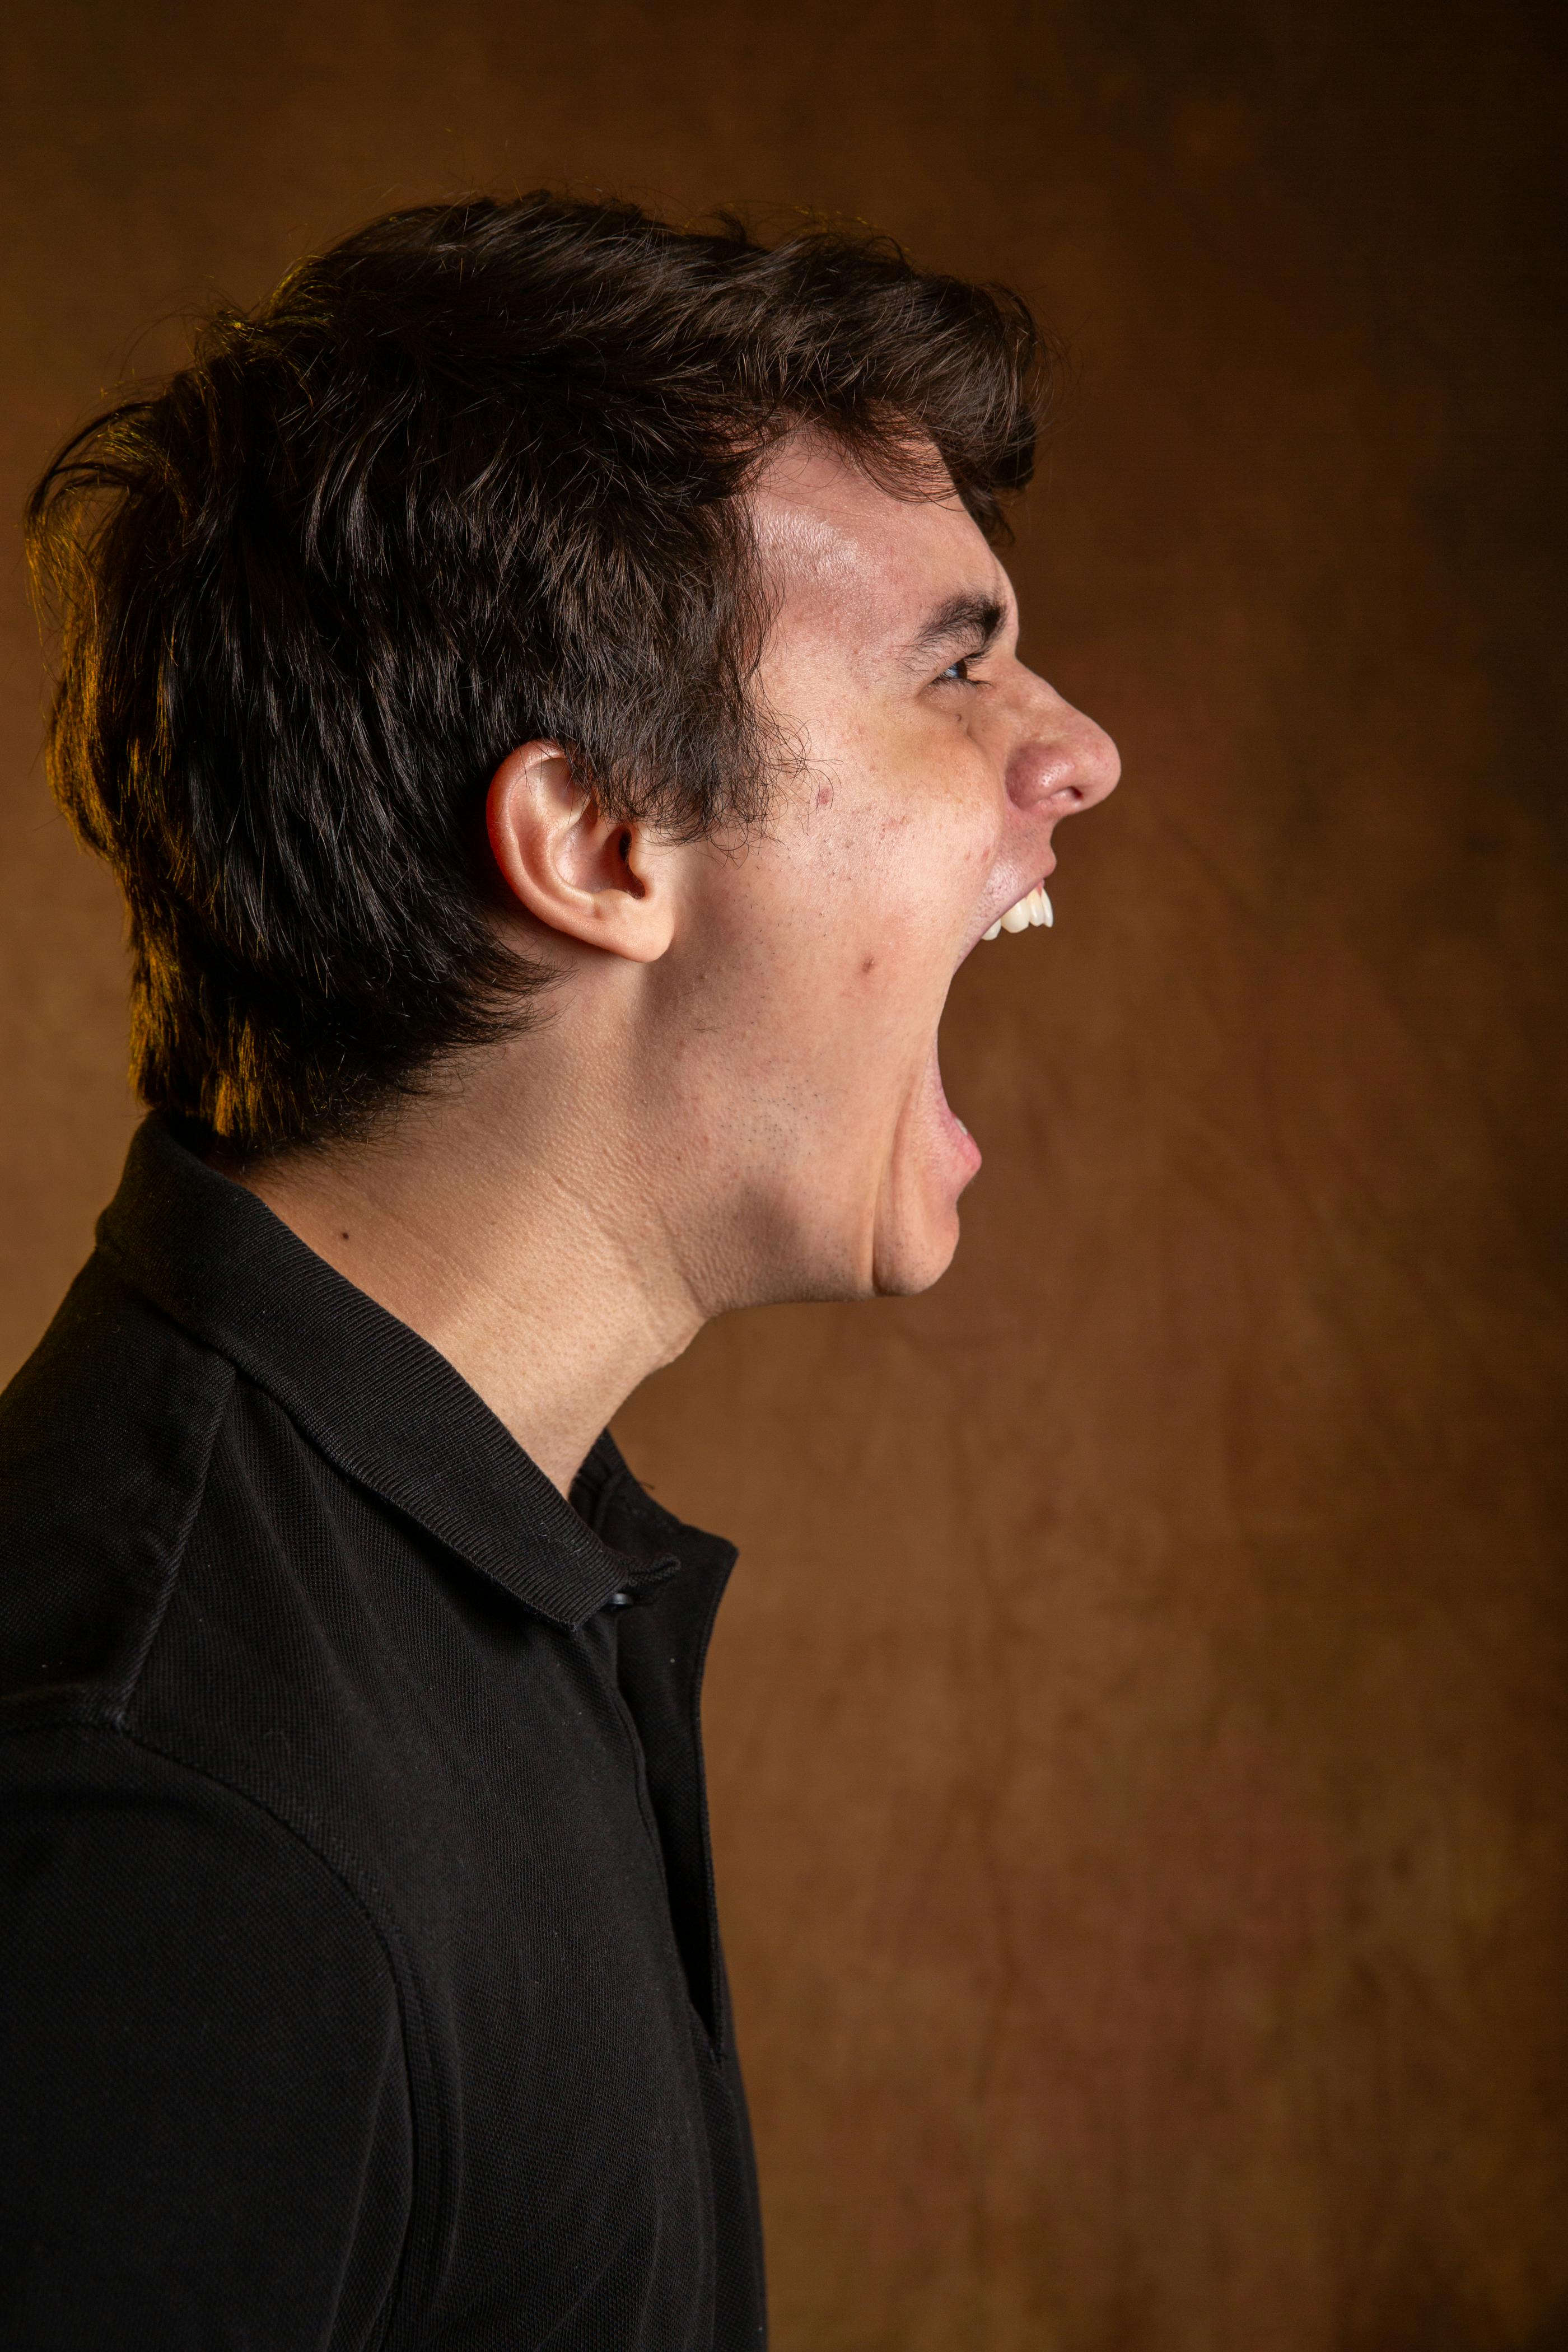 A man with his mouth wide opening while shouting at someone | Source: Pexels